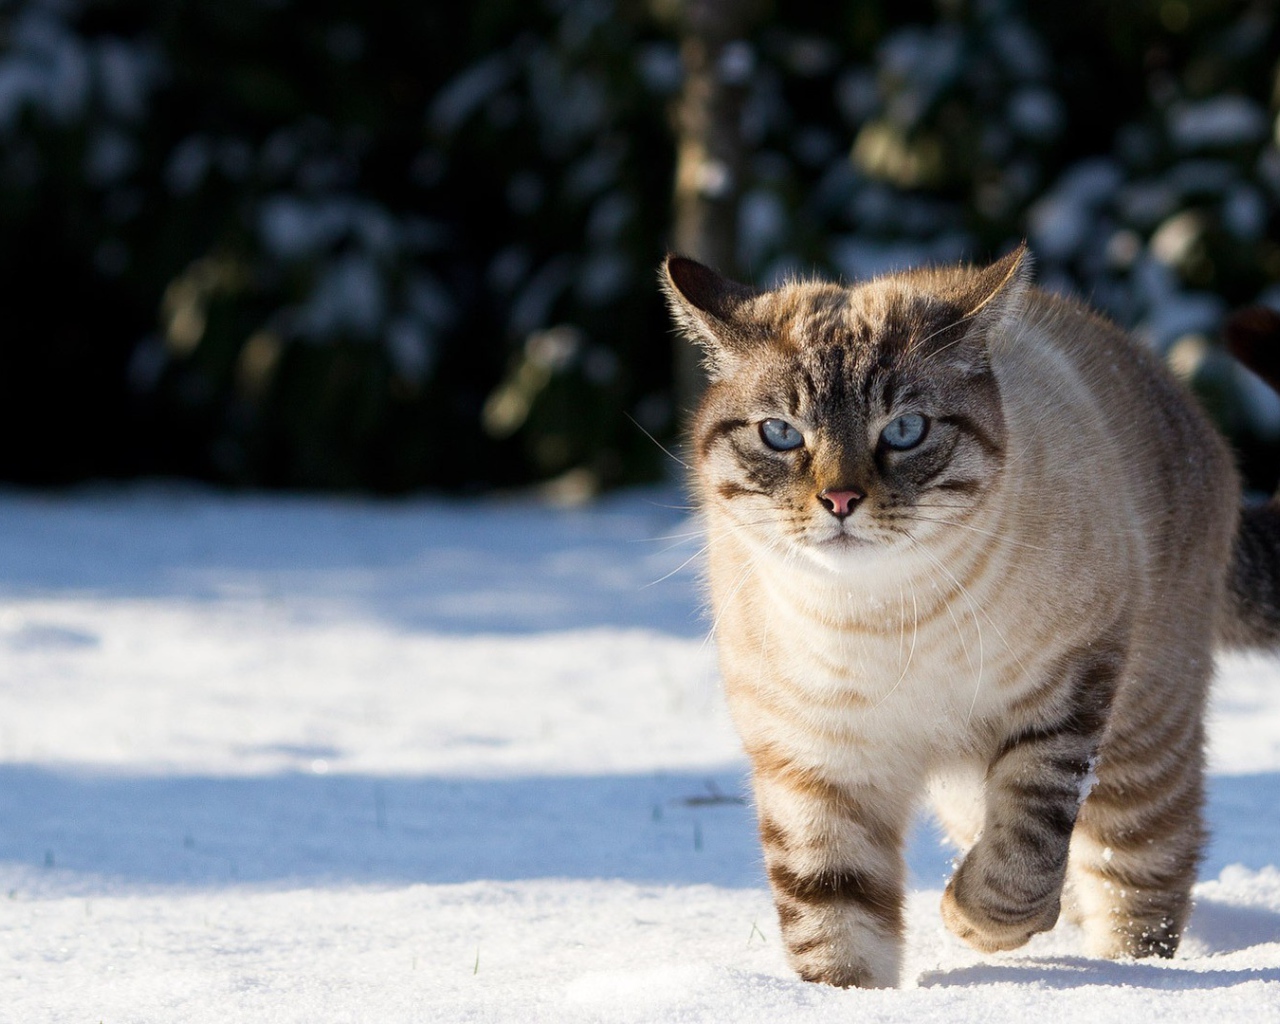 	   The cat walks in the snow